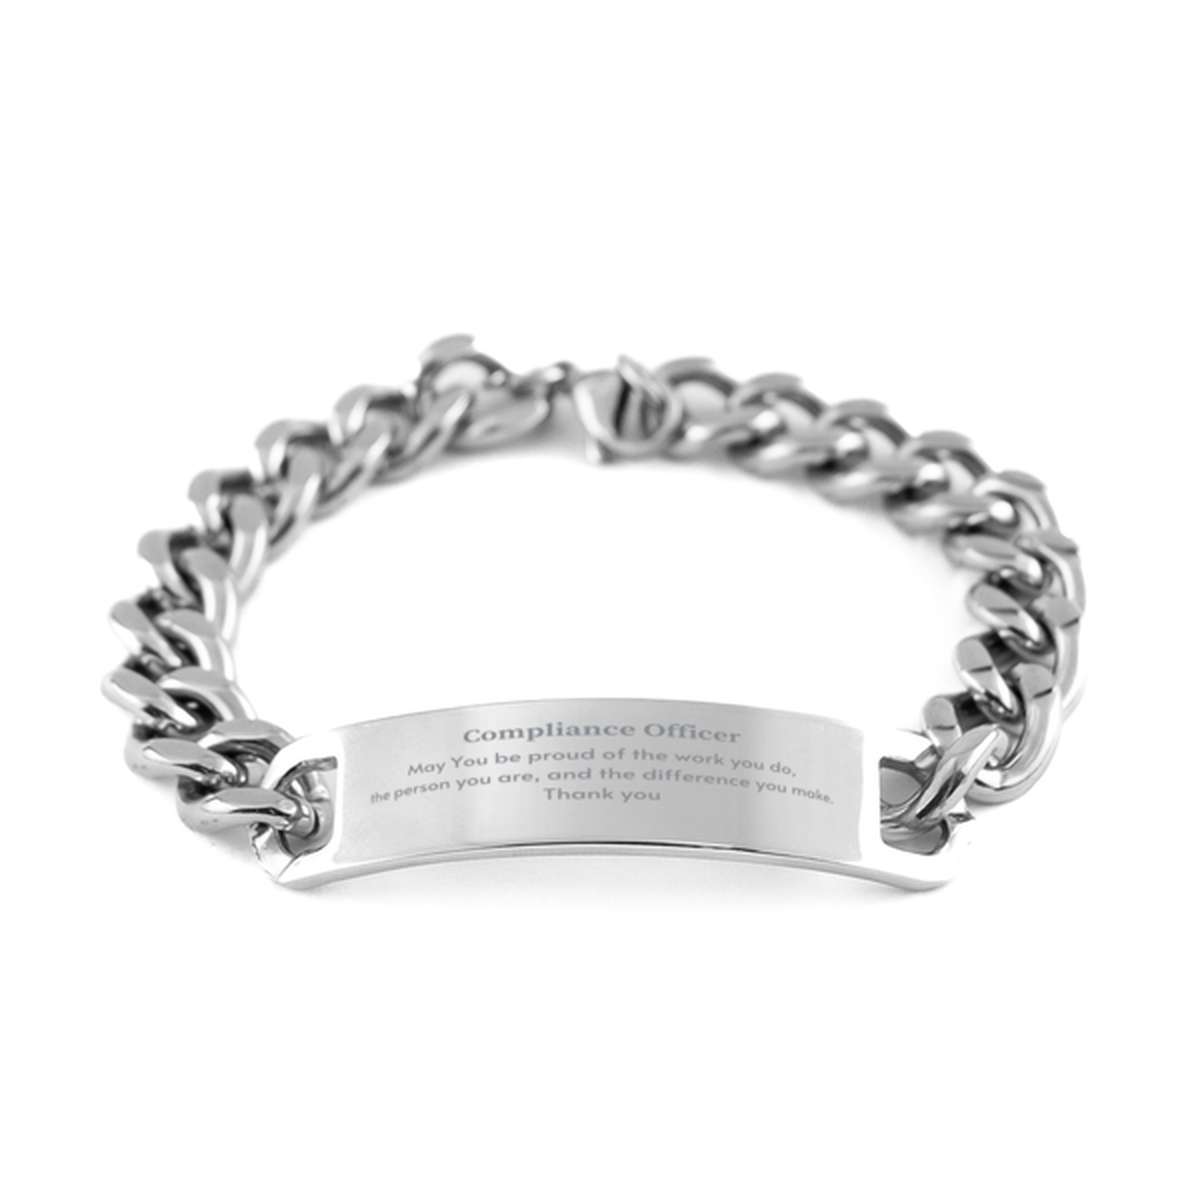 Heartwarming Cuban Chain Stainless Steel Bracelet Retirement Coworkers Gifts for Compliance Officer, Compliance Officer May You be proud of the work you do, the person you are Gifts for Boss Men Women Friends